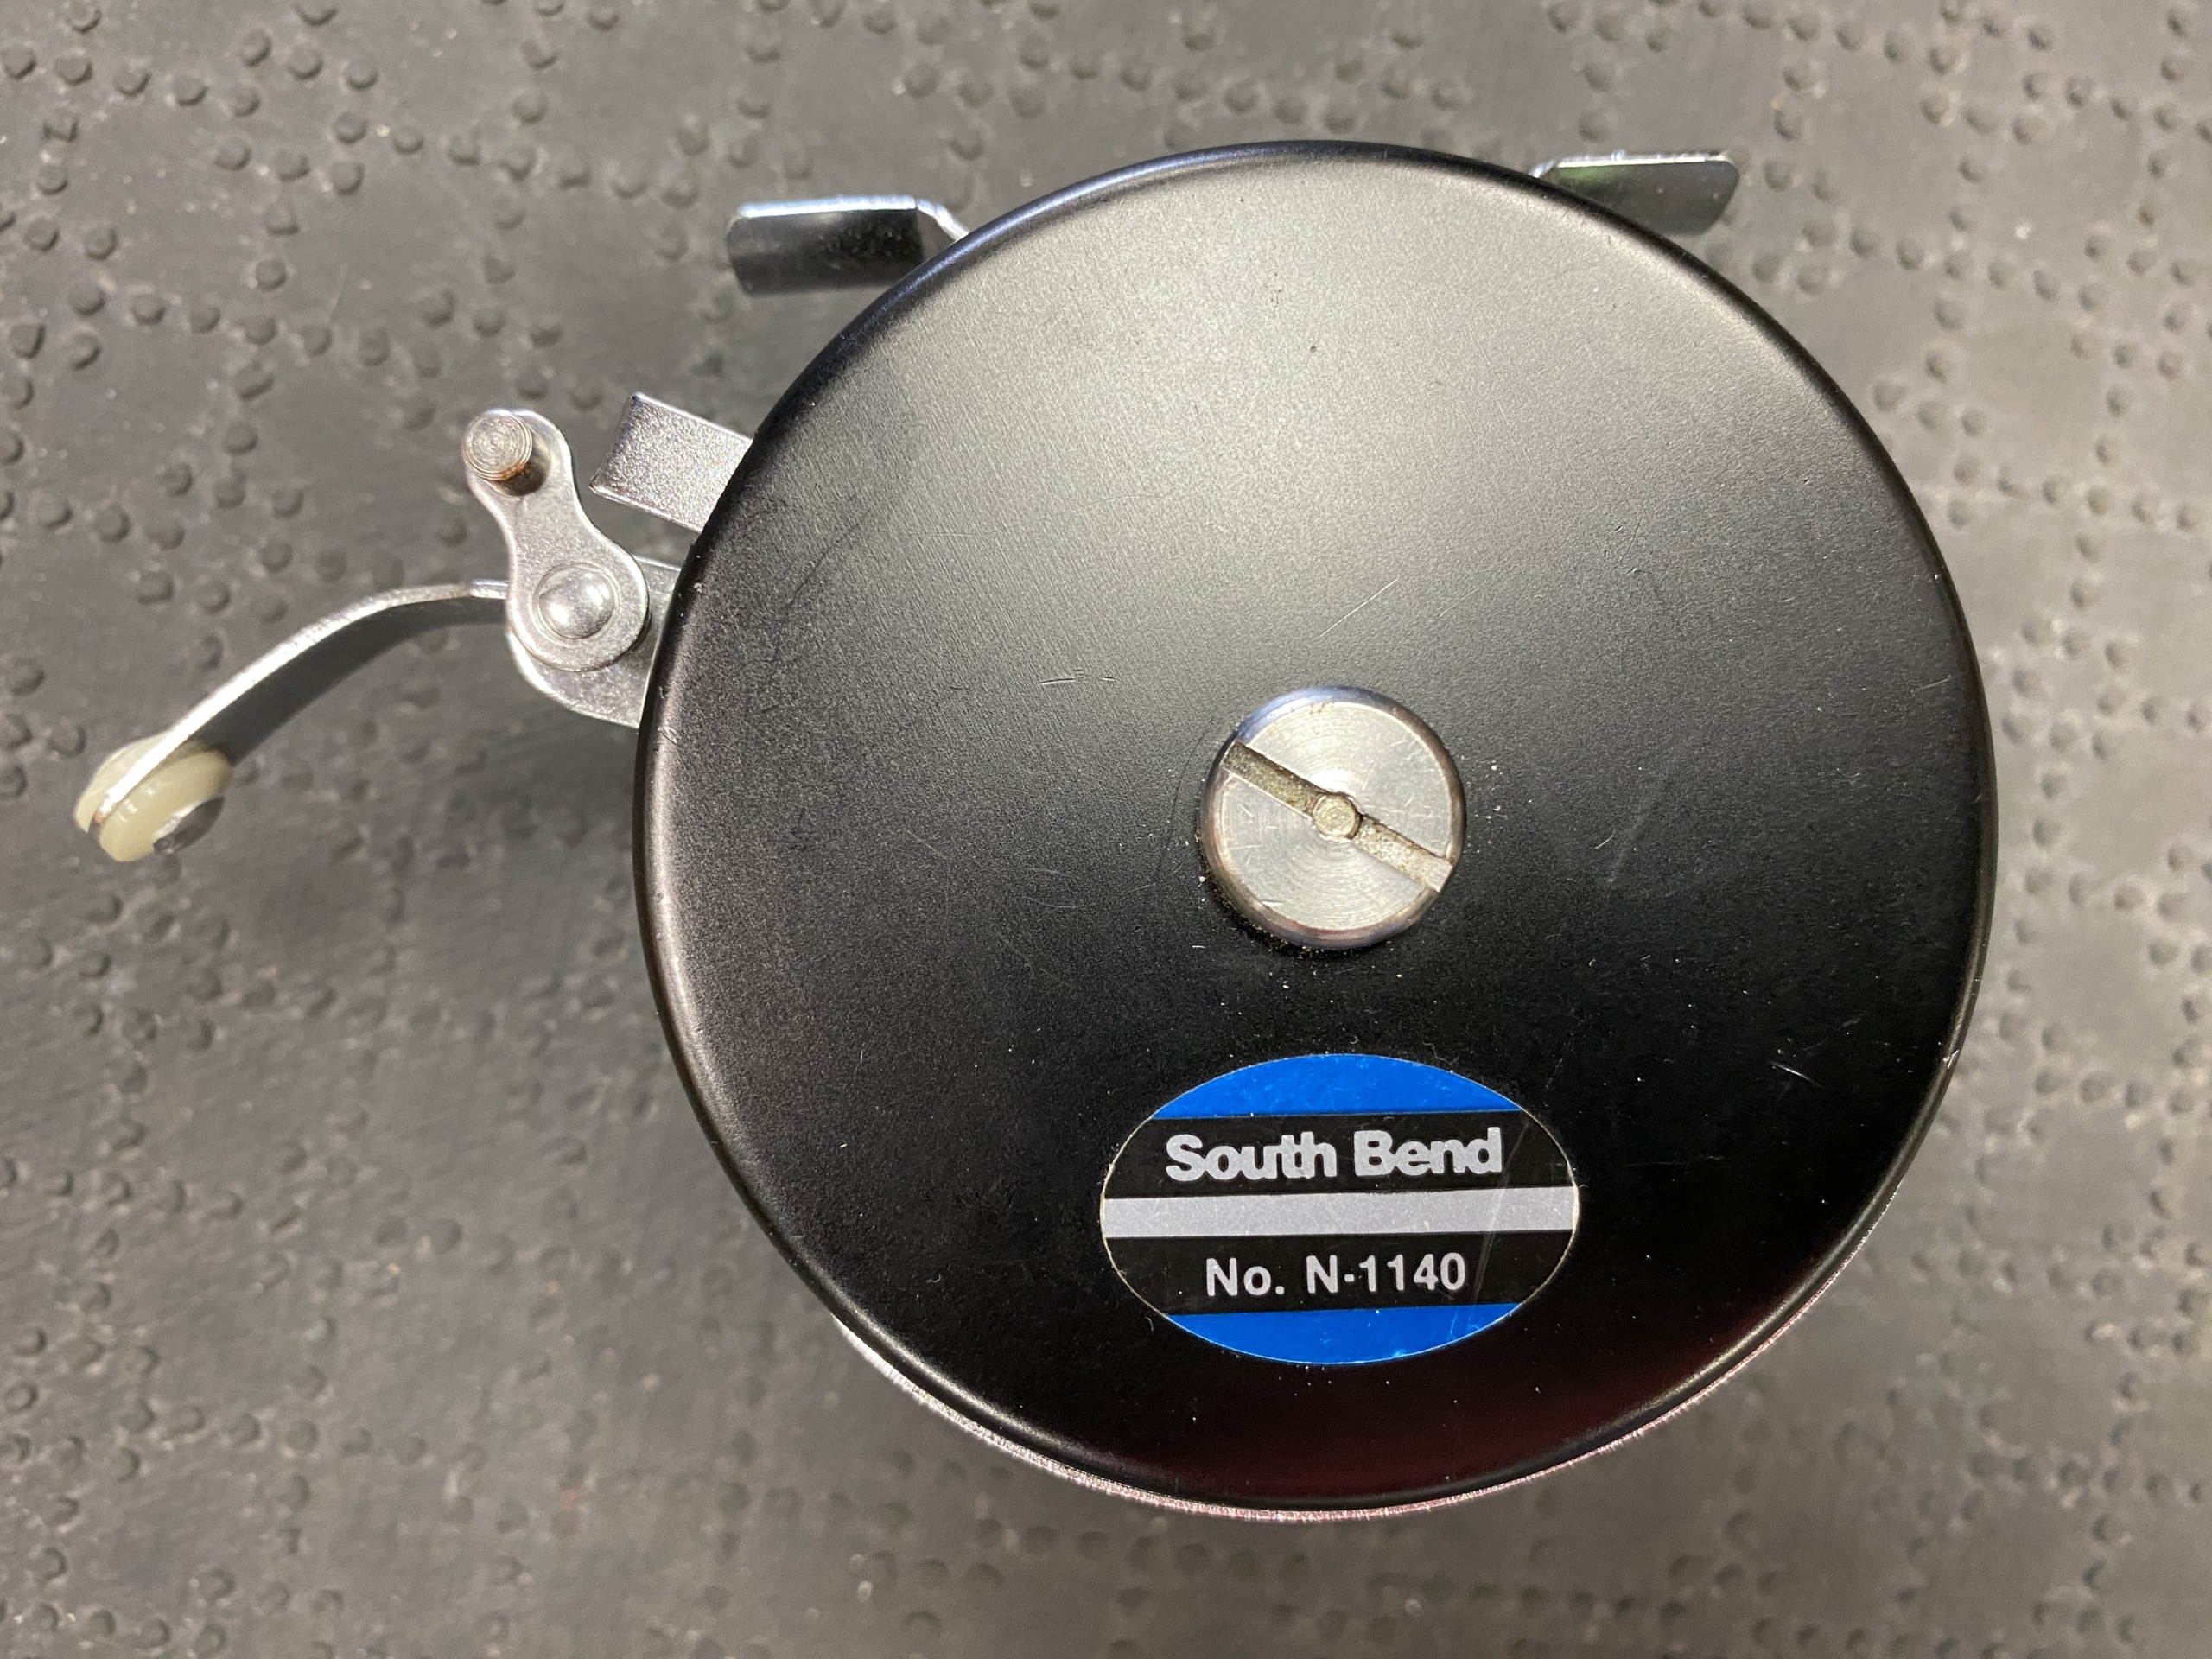 South Bend No. N1140 Automatic Fly Reel - C/W WF5 Fly Line - LIKE NEW! - $50